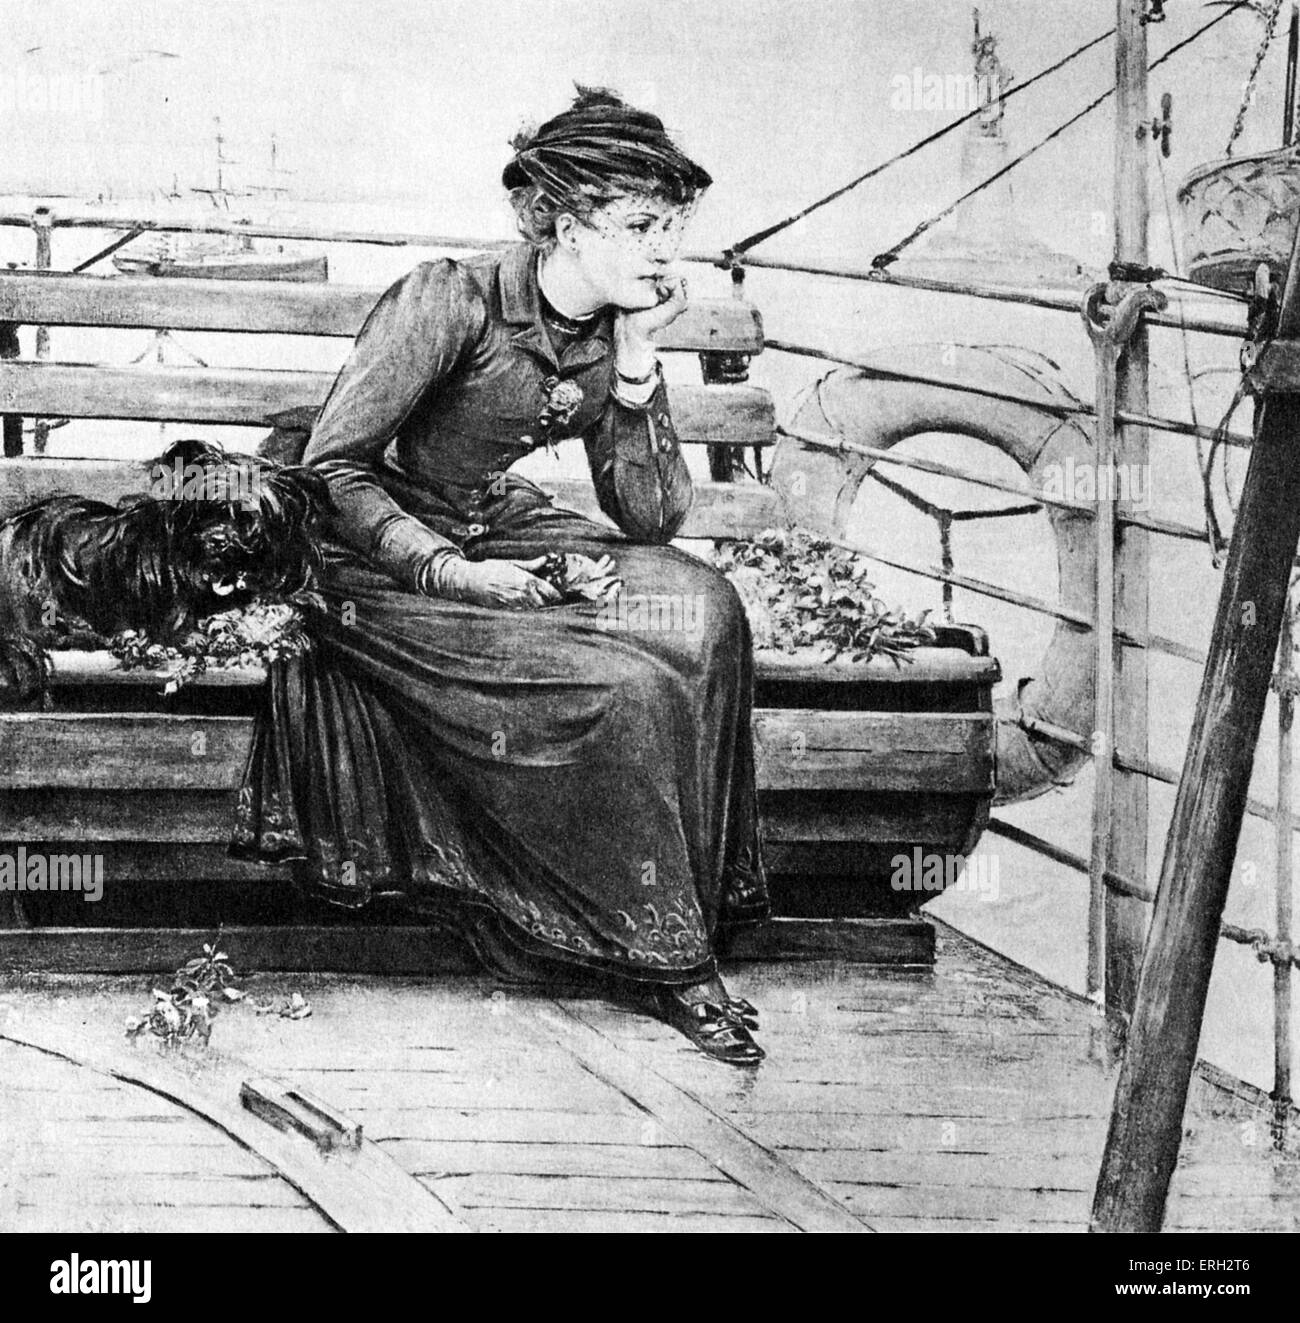 'Daisy Miller' by Henry James. Daisy Miller aboard a ship in a scene from the novella, first published 1878. American author: 15 April 1843 - 28 February 1916. Stock Photo